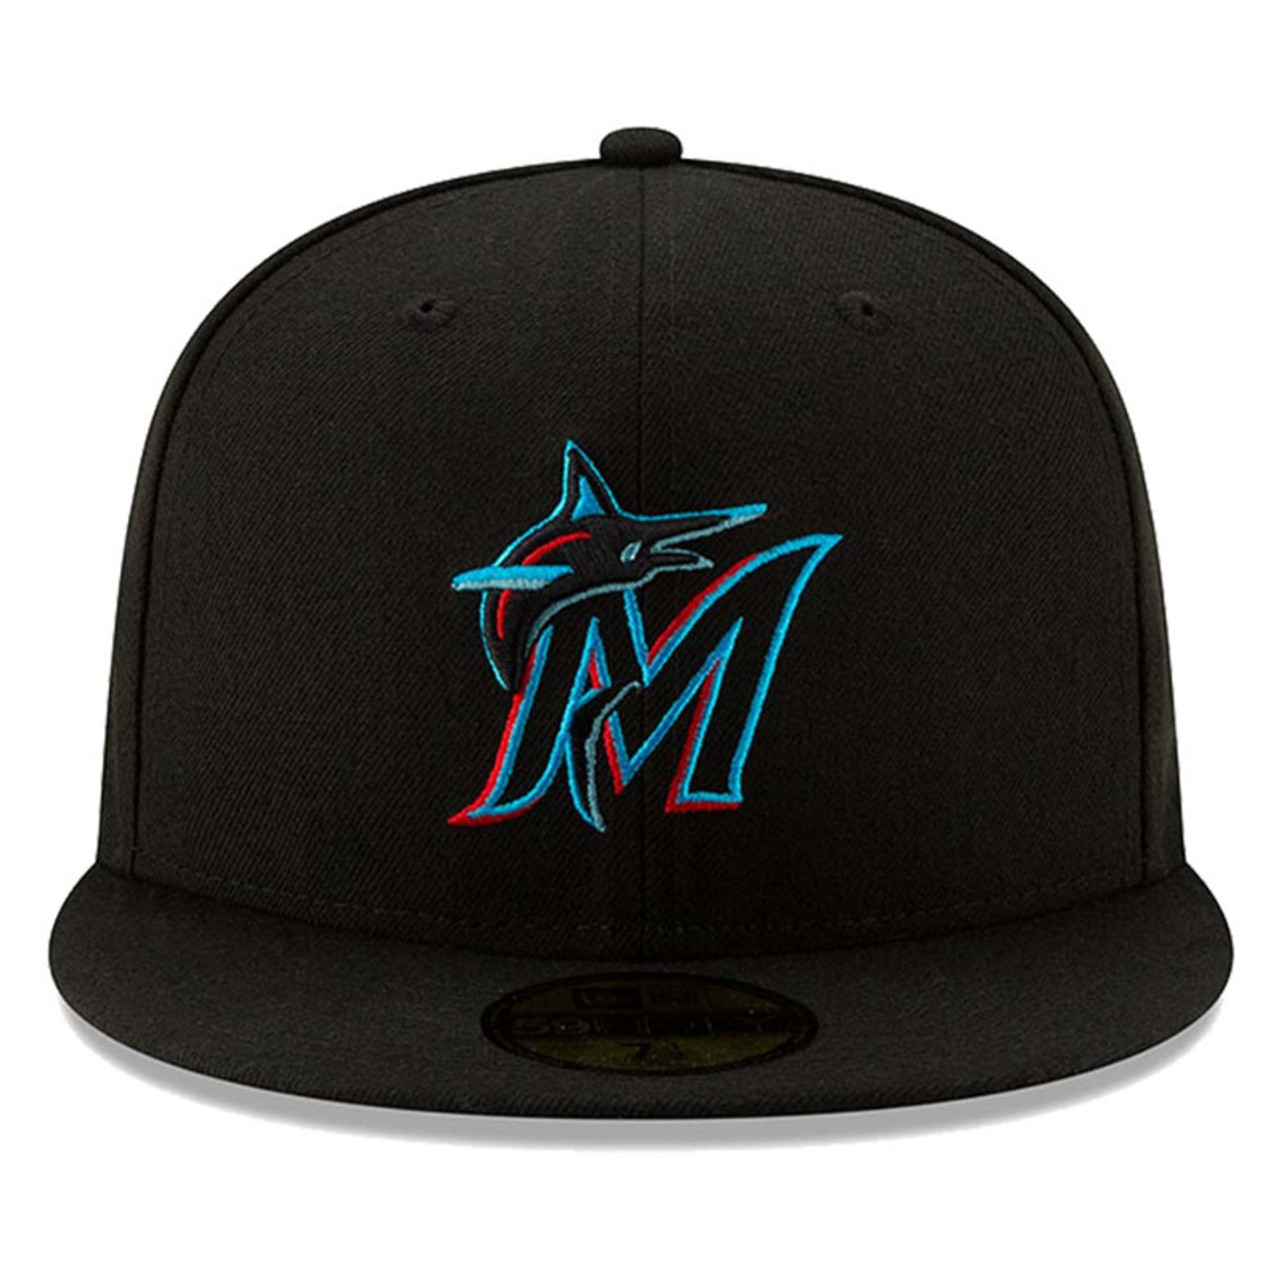 Miami Marlins New Era Cooperstown Collection Retro City 59FIFTY Fitted Hat  - White